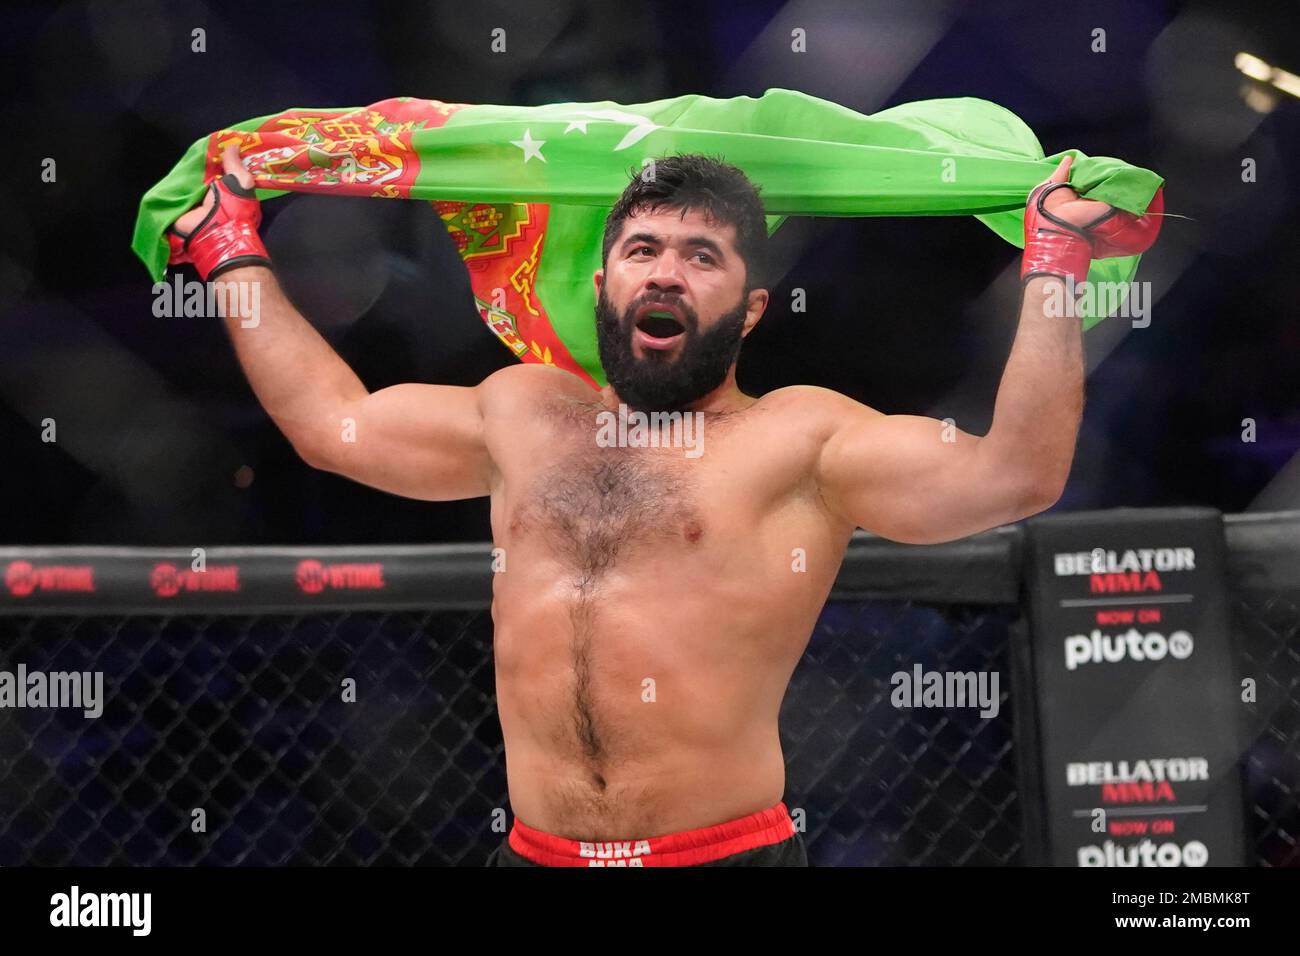 Dovletdzhan Yagshimuradov celebrates after defeating Rafael Carvalho during a light heavyweight match at the Bellator 277 mixed martial arts event in San Jose, Calif., Friday, April 15, 2022